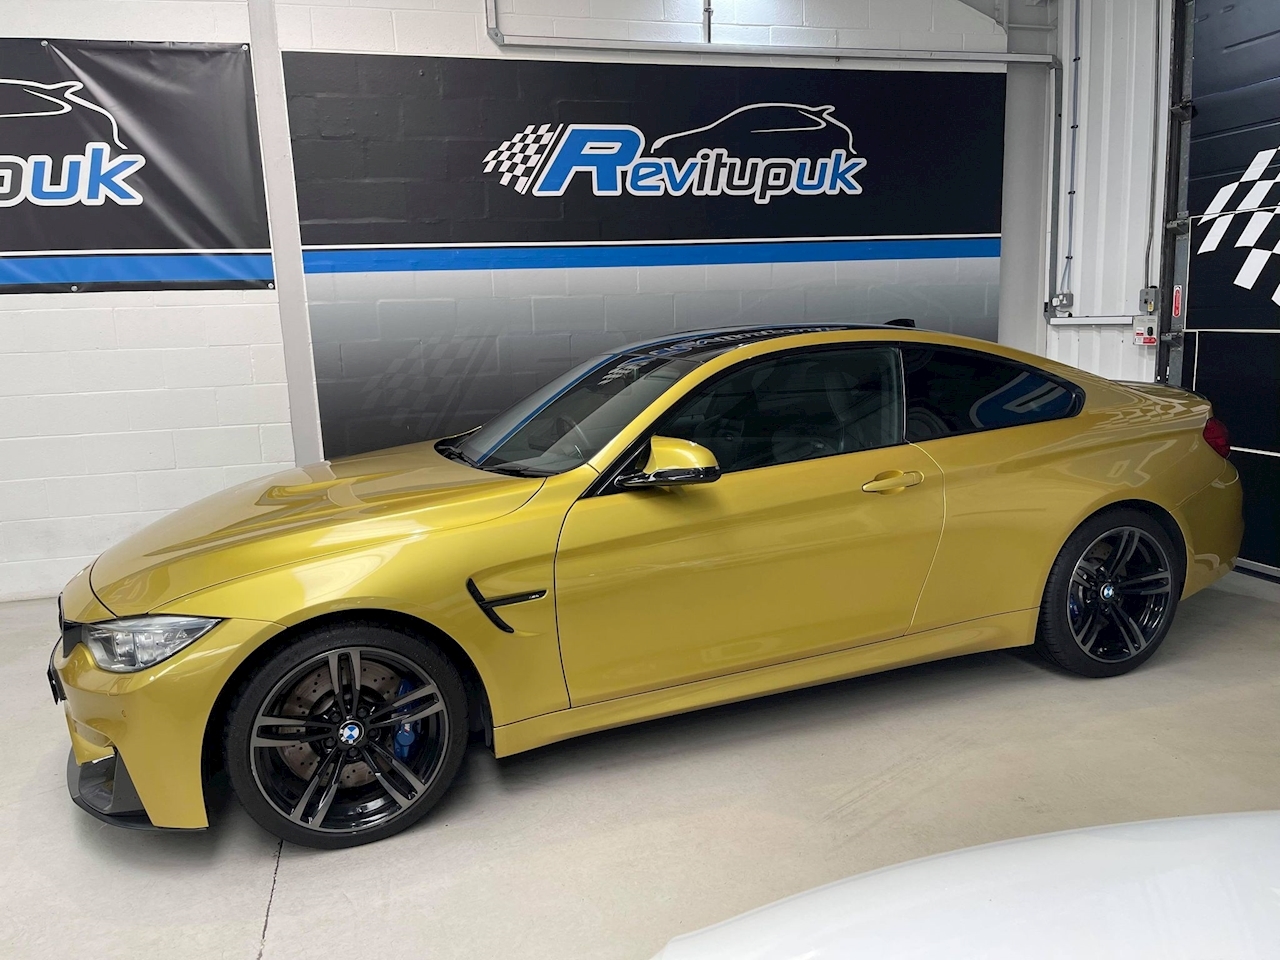 3.0 BiTurbo Coupe 2dr Petrol DCT (s/s) (431 ps)